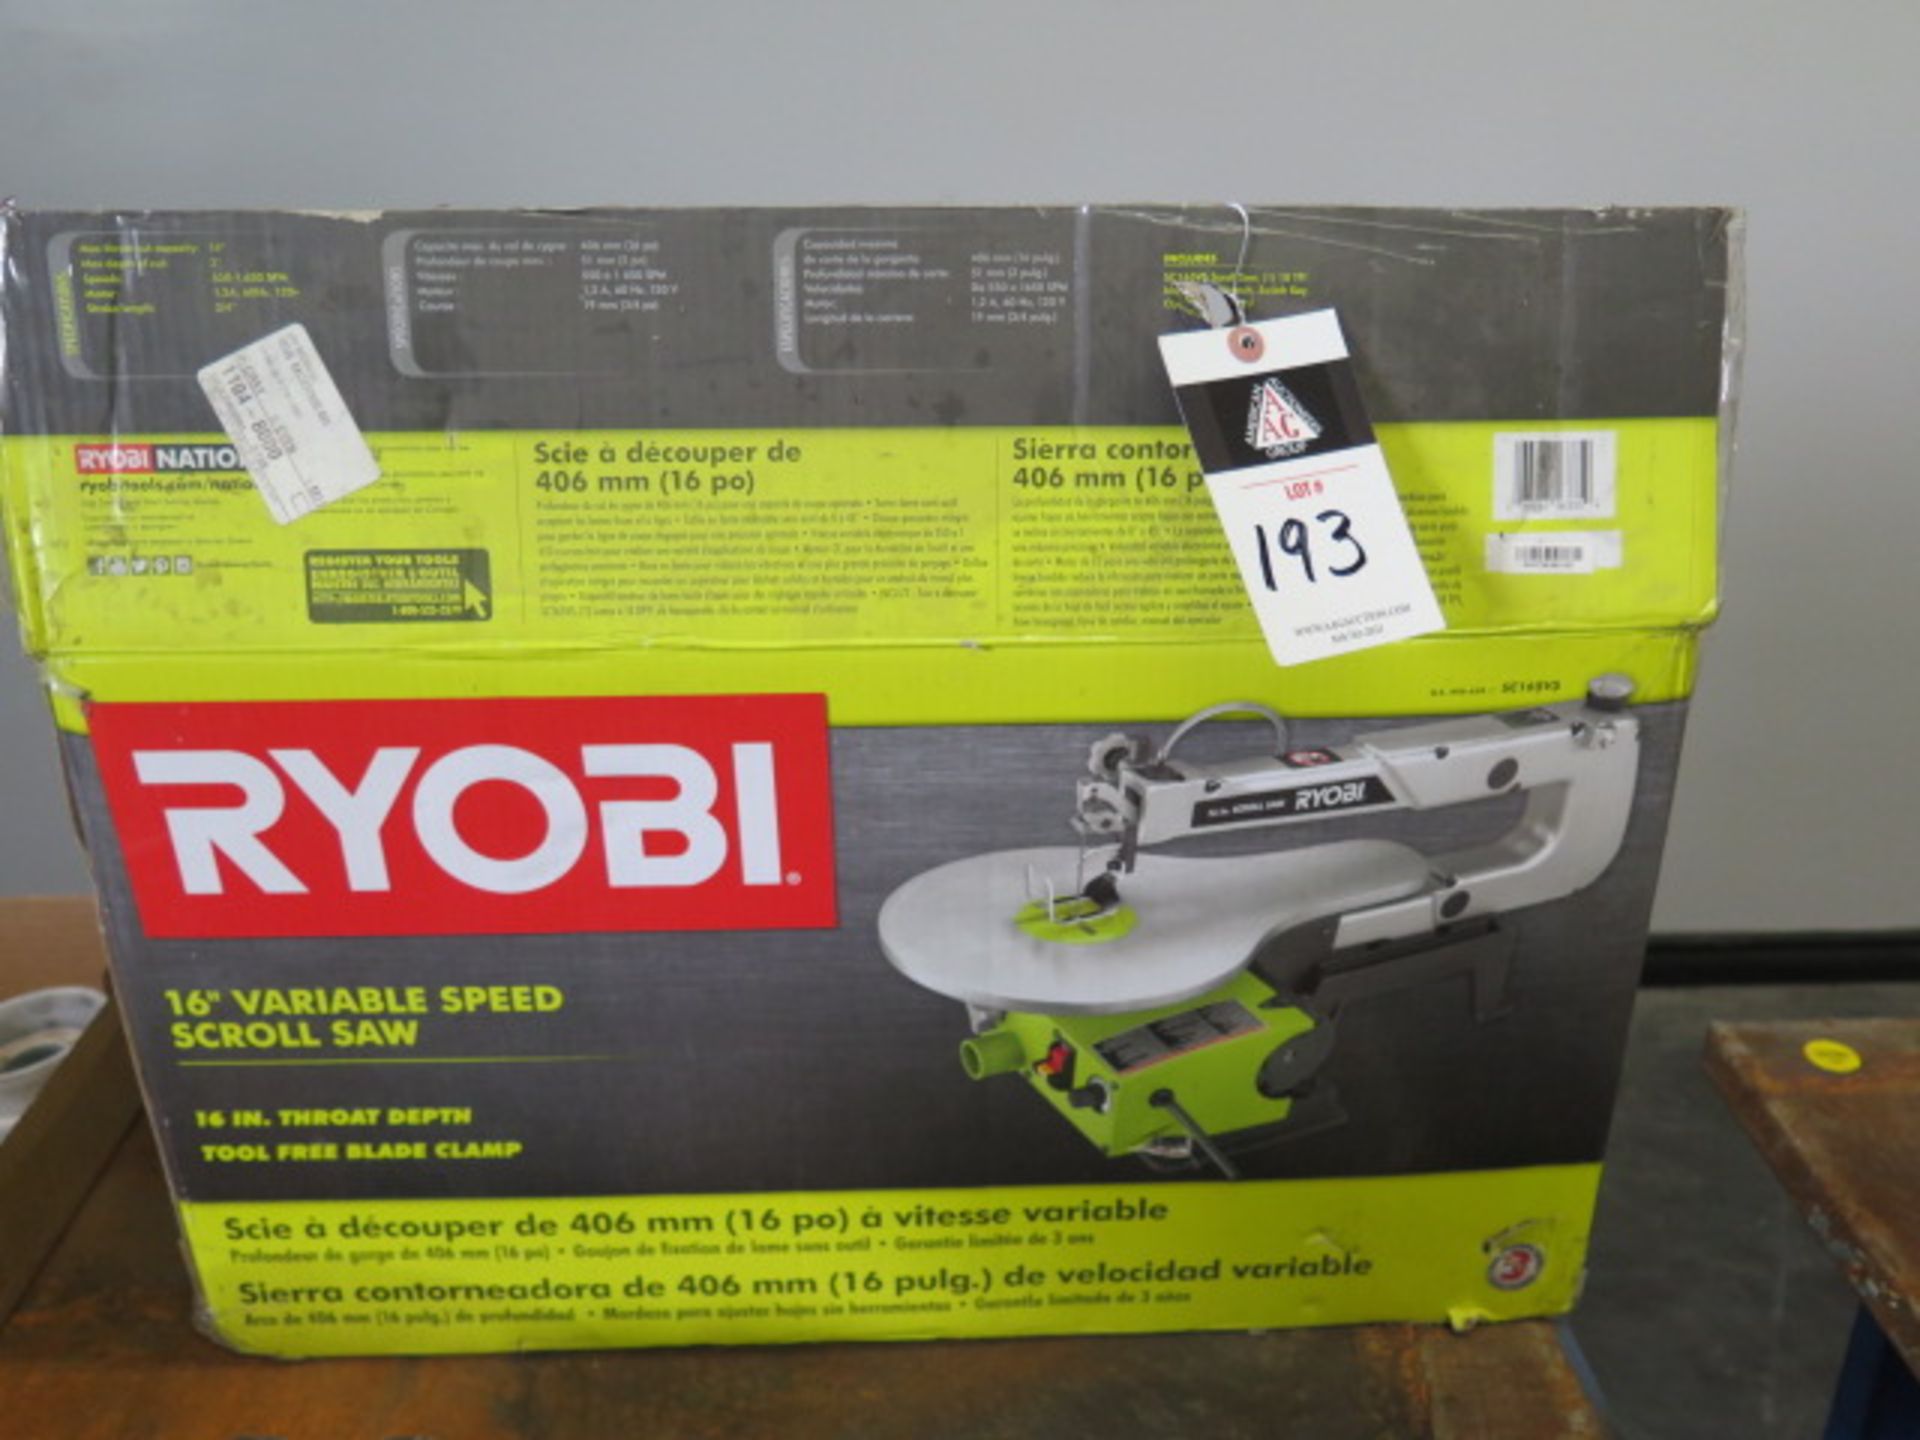 Ryobi 16" Variable Speed Scroll Saw (SOLD AS-IS - NO WARRANTY)